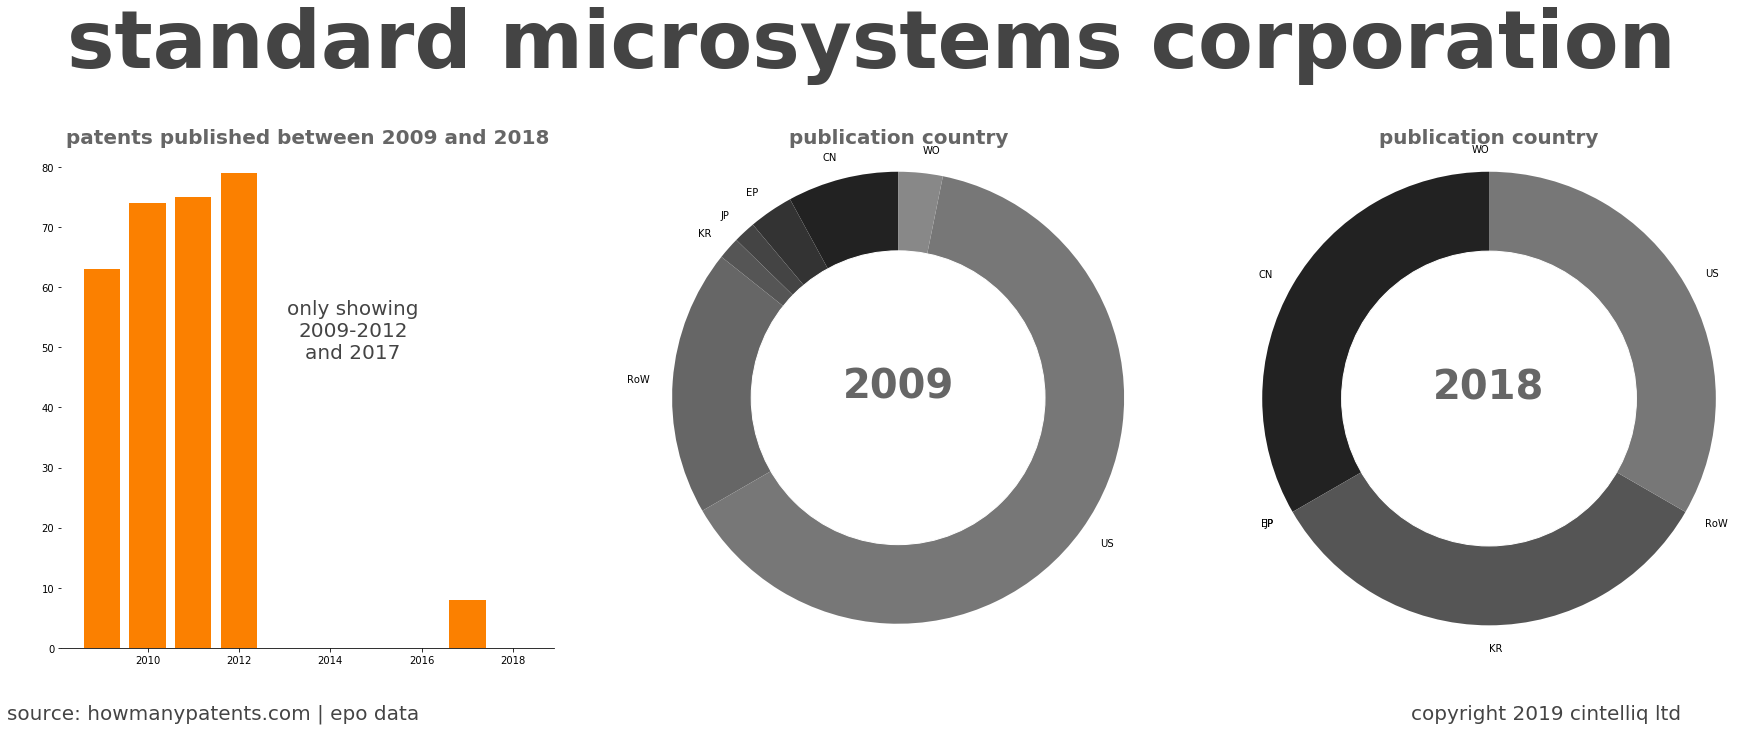 summary of patents for Standard Microsystems Corporation